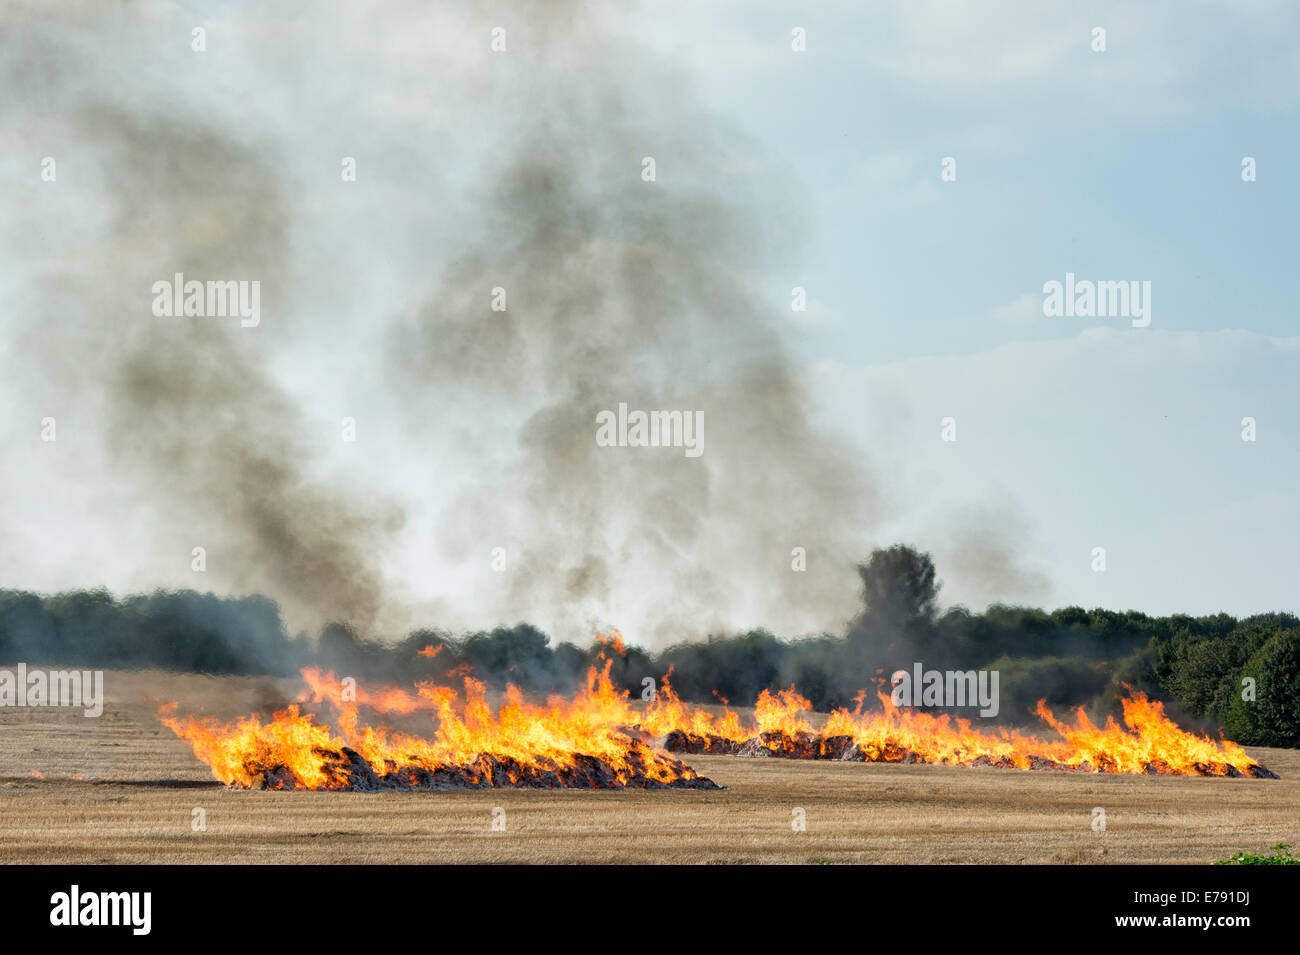 Burning Straw in a farmers field. Oxfordshire, England Stock Photo